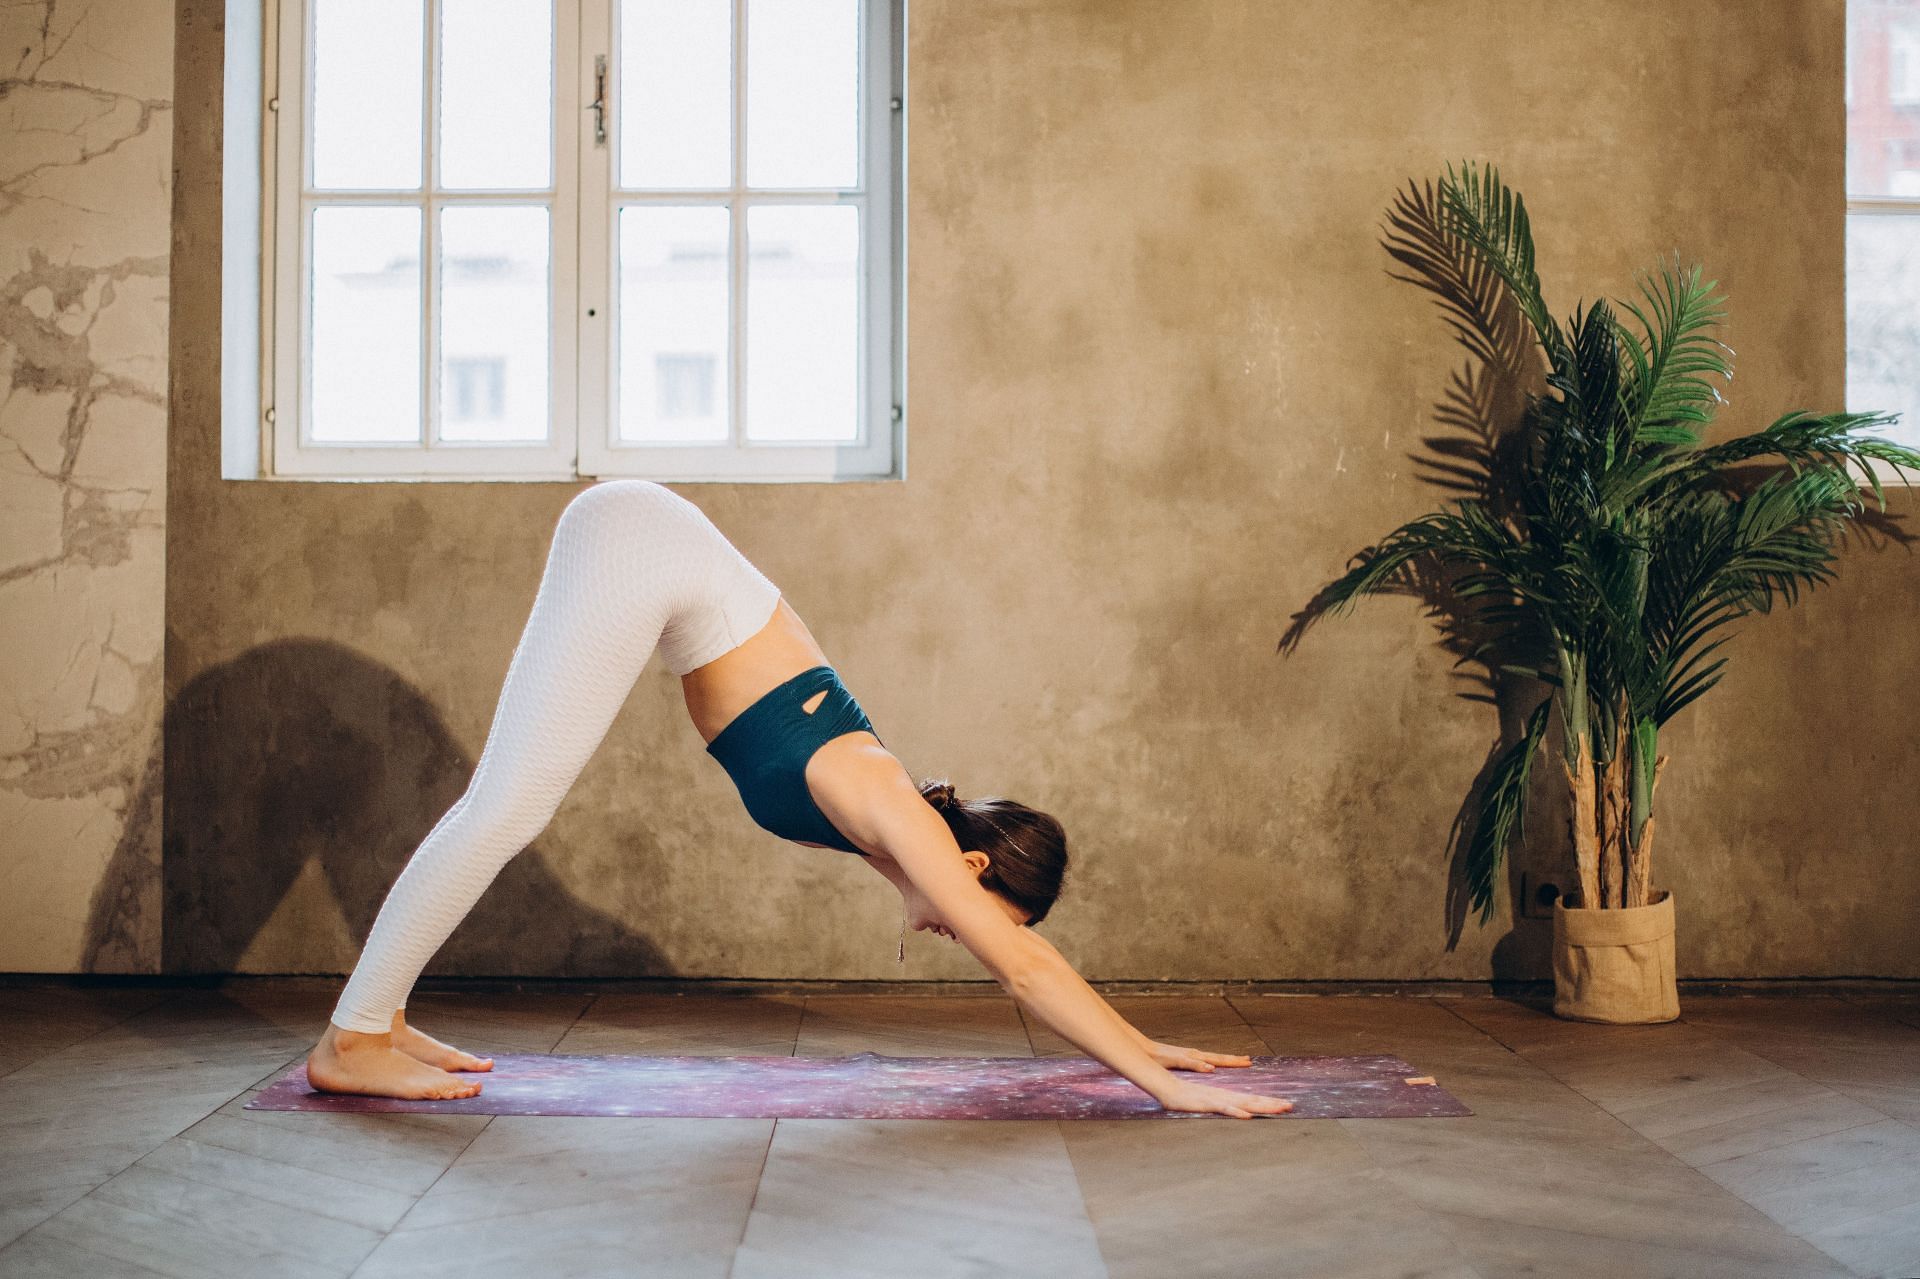 Upward and downward facing dog are two of the best stretches for the back. (Image via Pexels/Elina Fairytale)